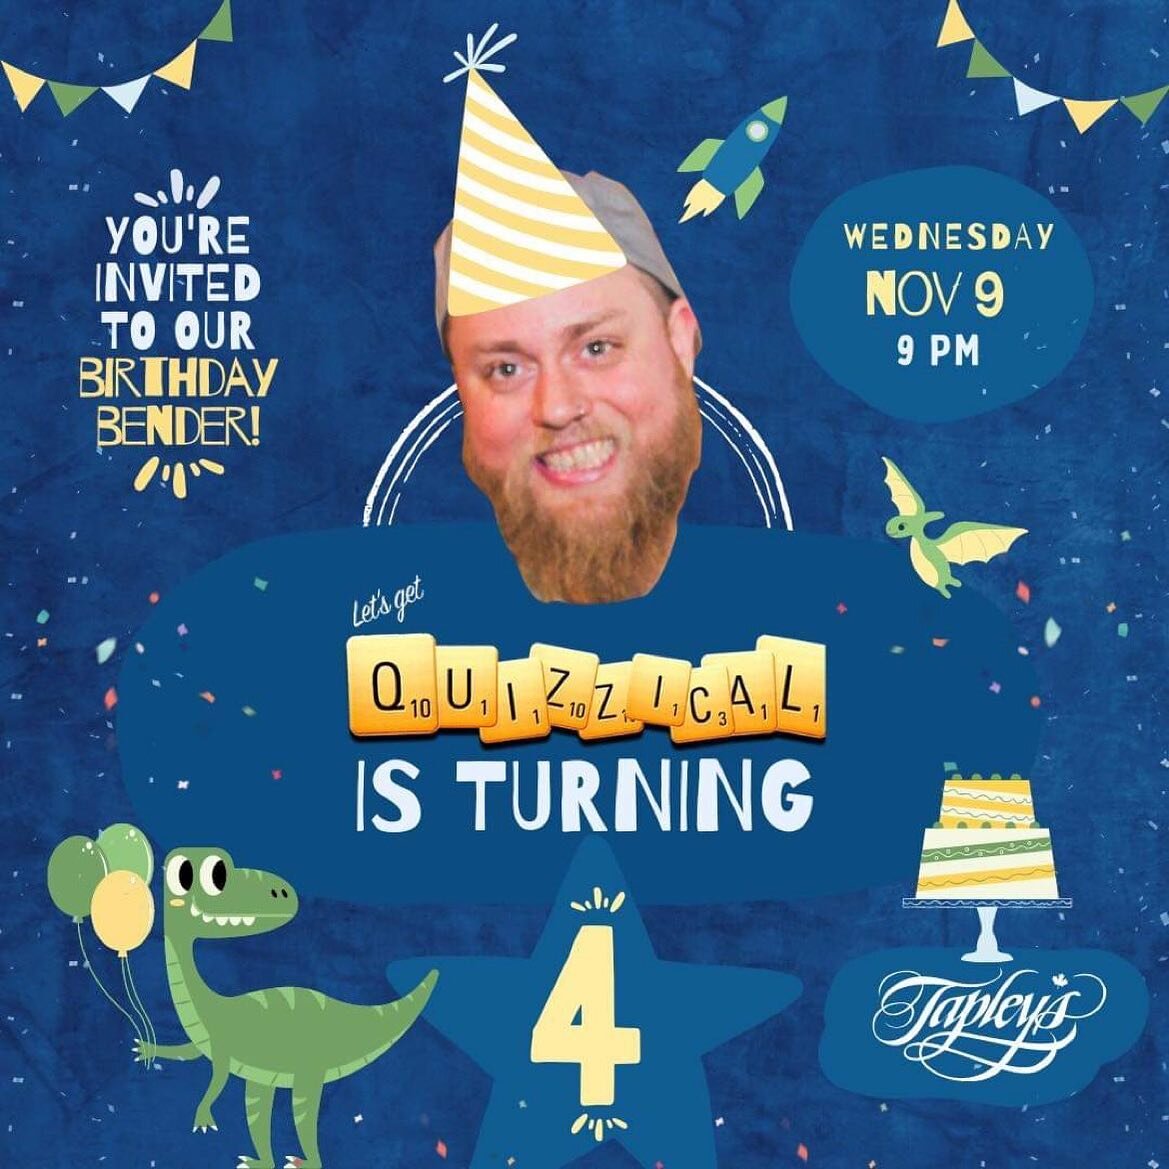 4 years of complete, utter nonsense!

We&rsquo;re celebrating 4 years of chaos at @letsgetquizzicalwhistler on Wednesday night at @tapleyspub from 9pm. For some reason youse muppets keep turning up and I get keep paying my rent 😂 😝 

We&rsquo;ve co